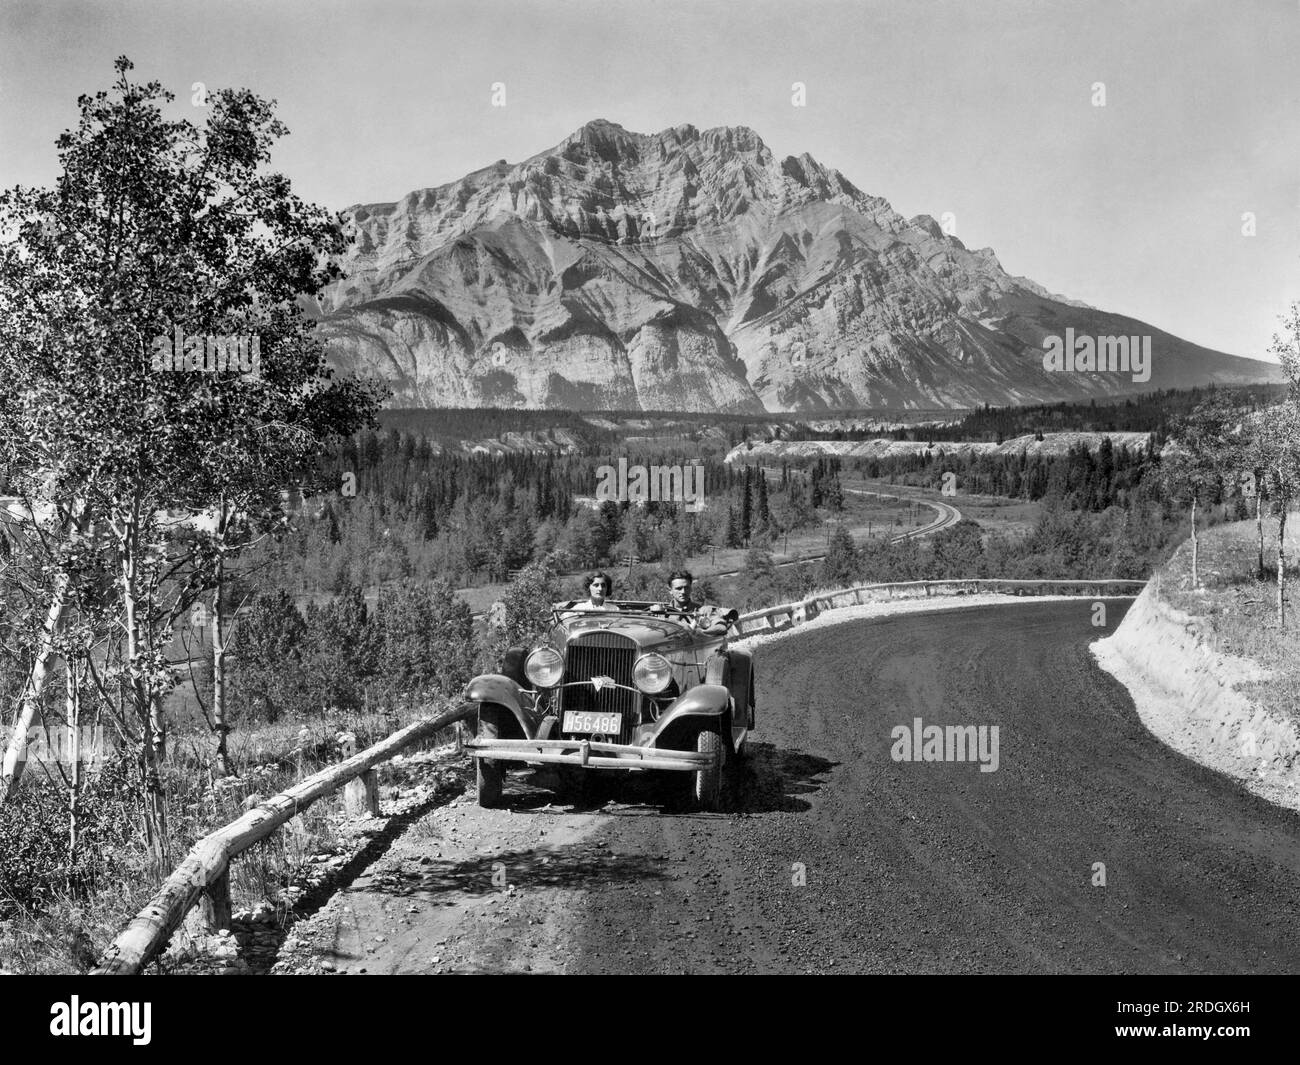 Alberta, Canada:   1931 Driving a 1930 Chrysler 77 Roadster along the Canadian Pacific Railway Line between Banff and Jasper in Canada. Stock Photo